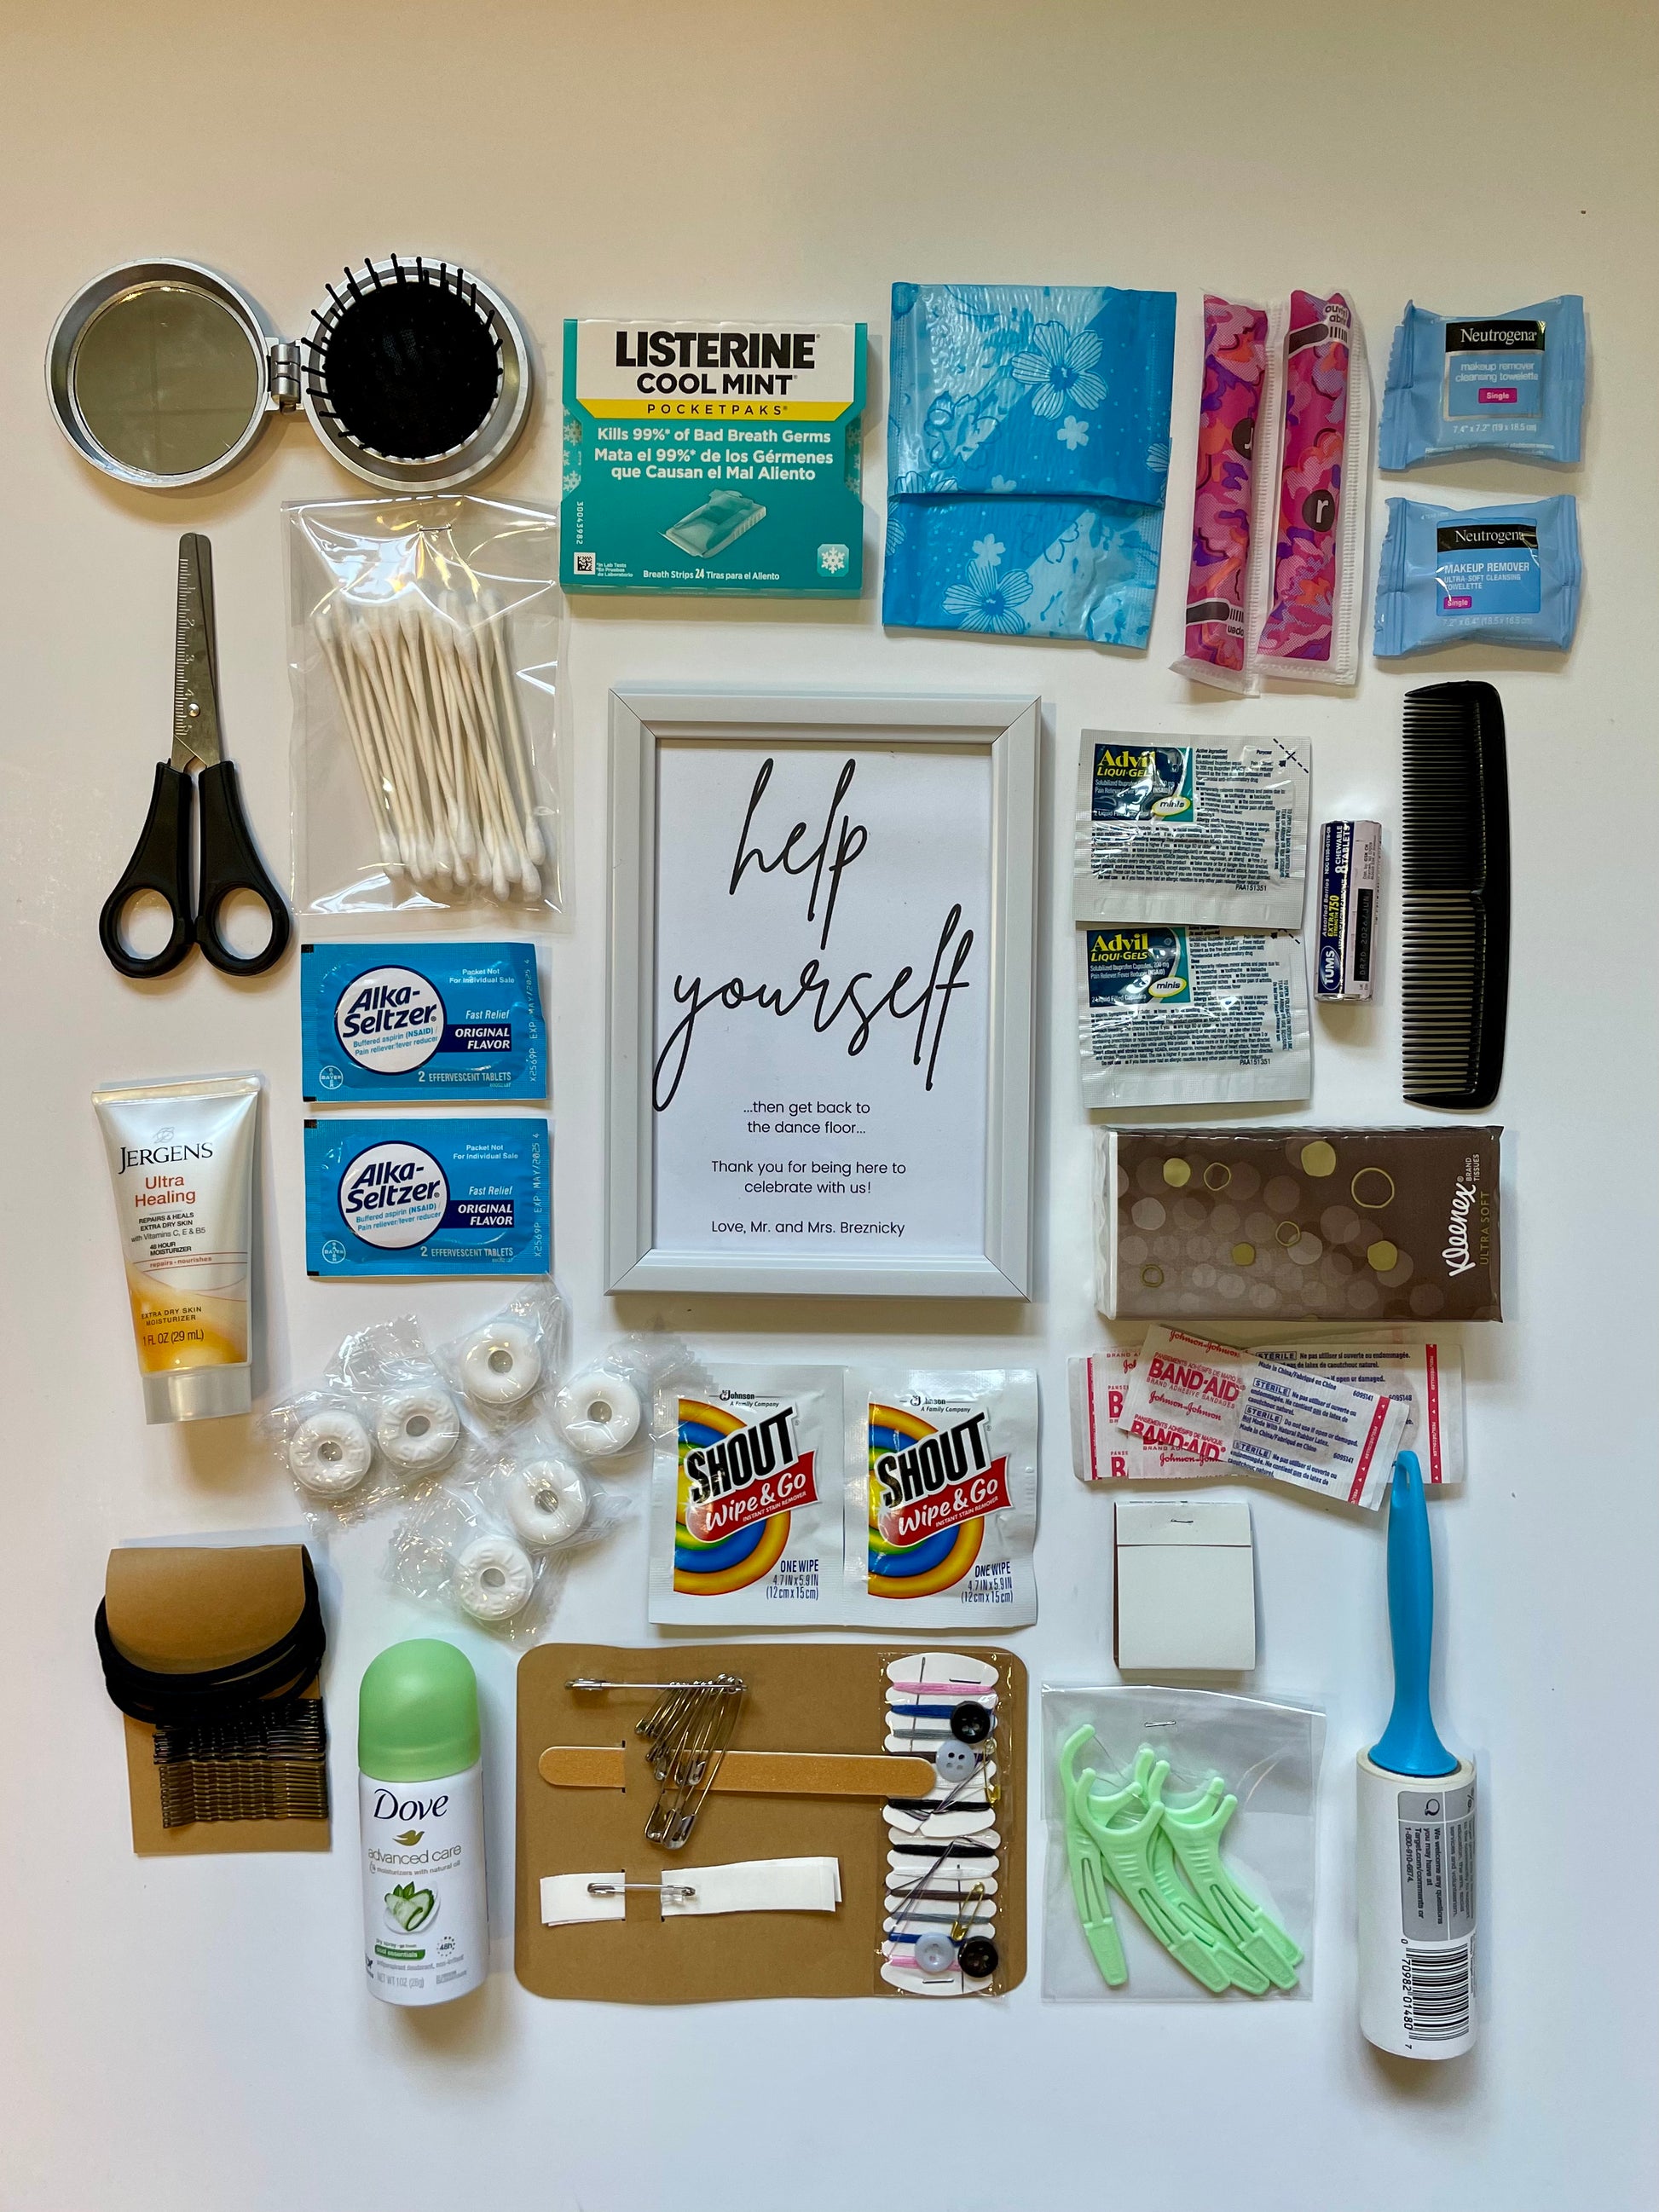  With You in Mind, inc. - Wedding Day Emergency Kit